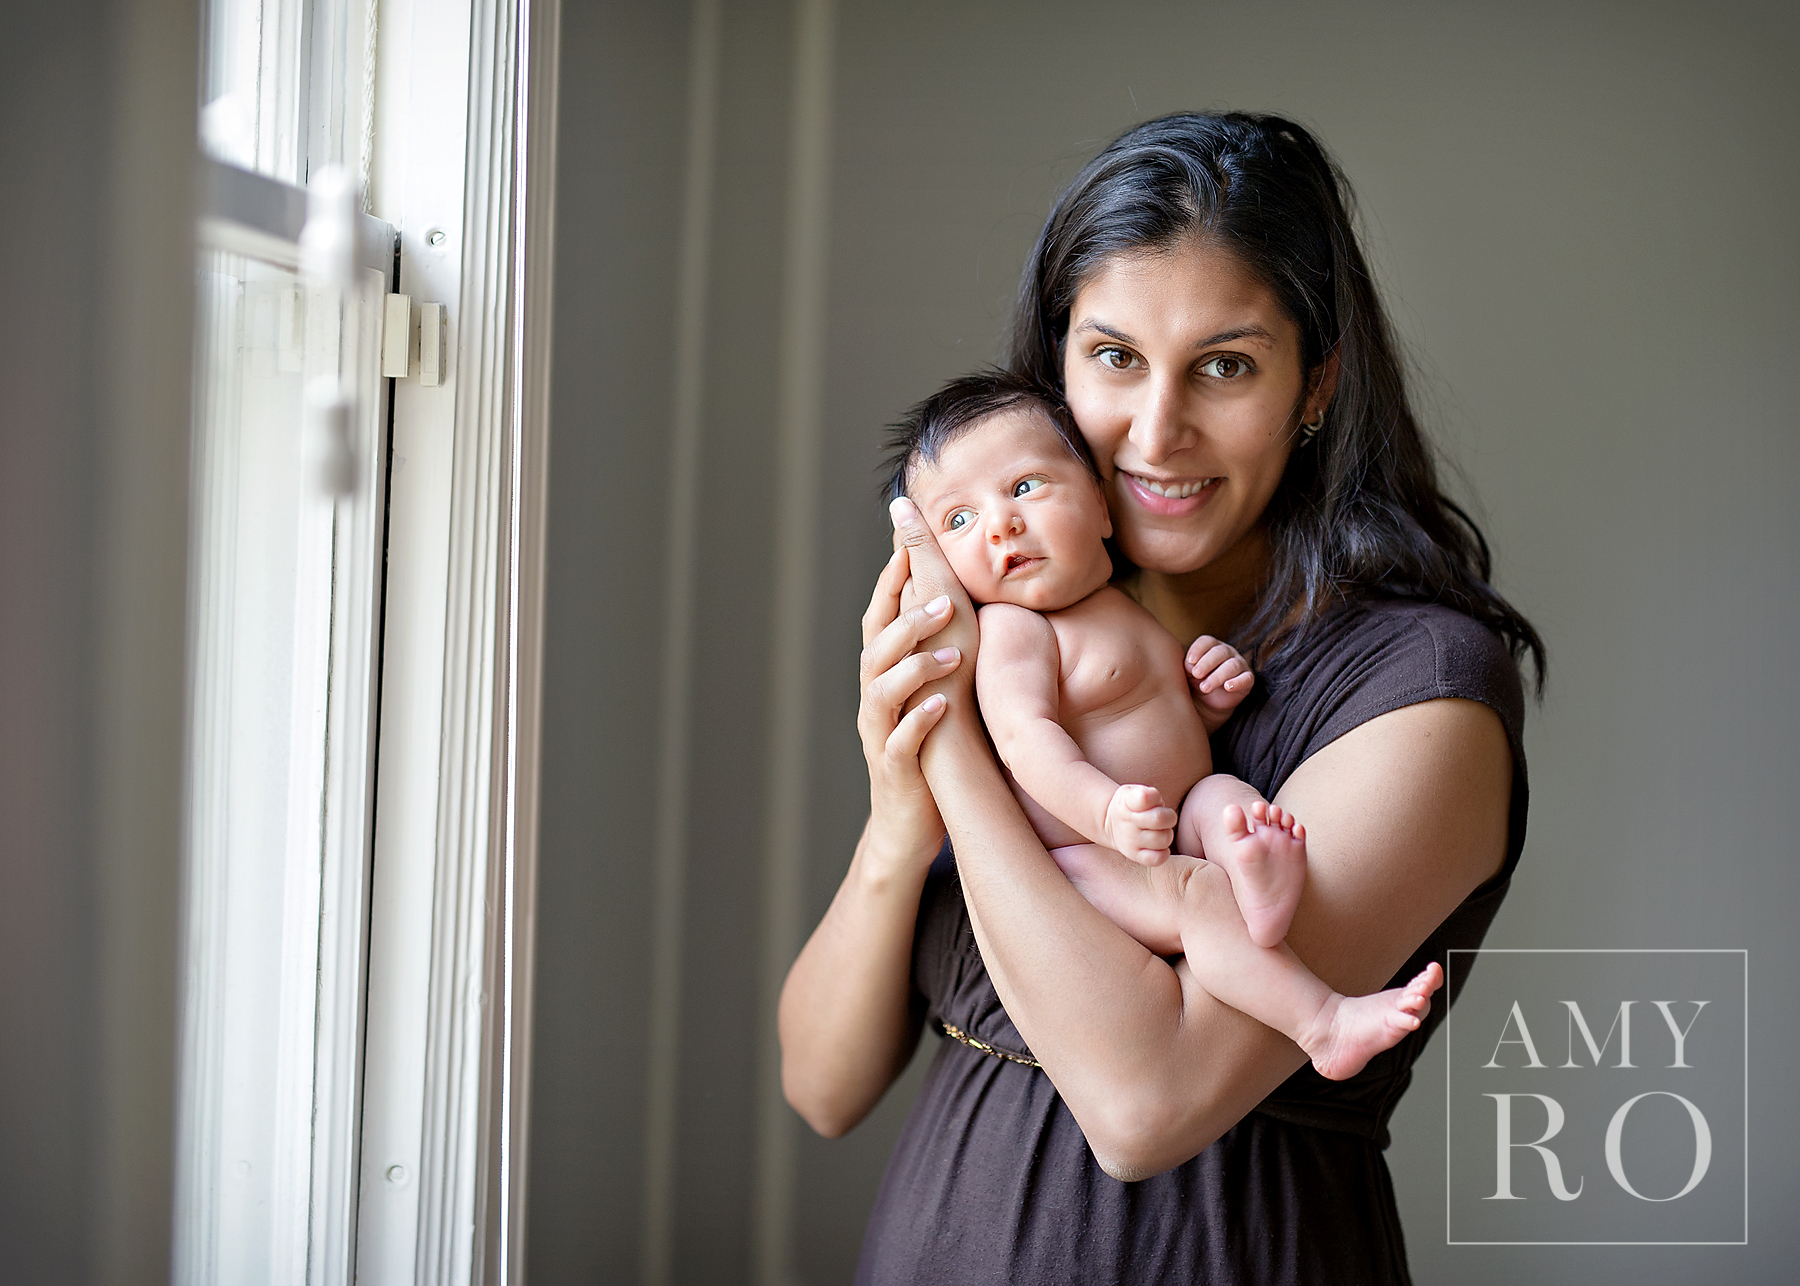 Beautiful image of mother with her newborn daughter in window light during a newborn lifestyle session